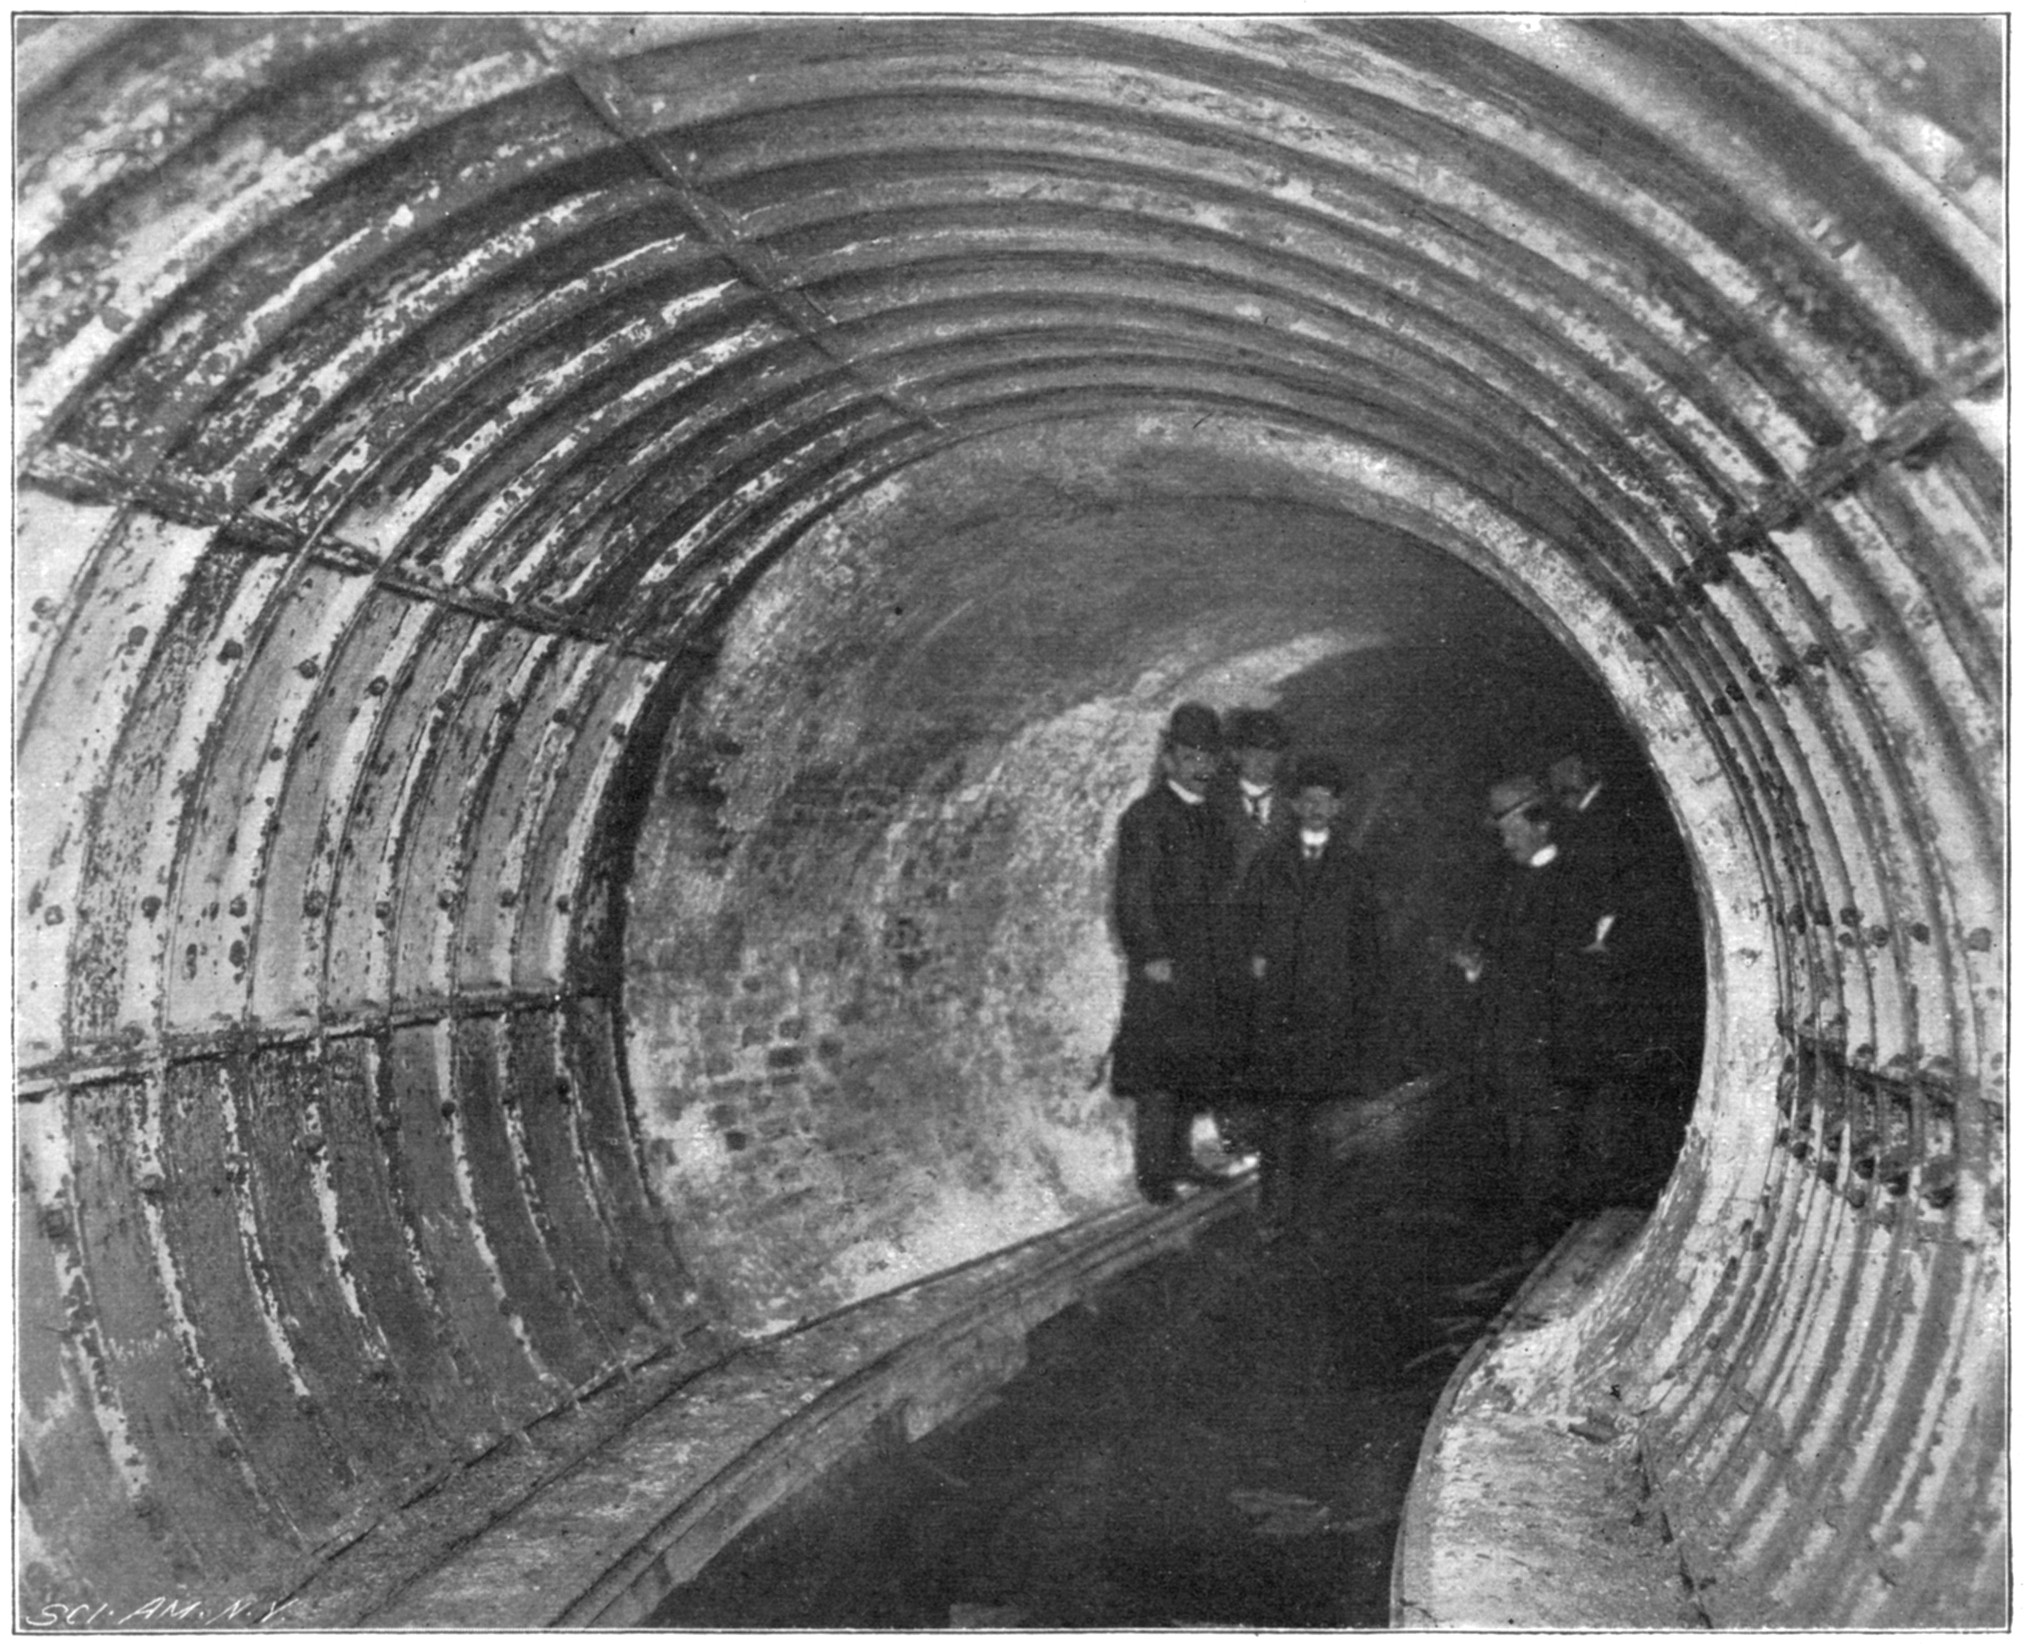 tunnel in 1898